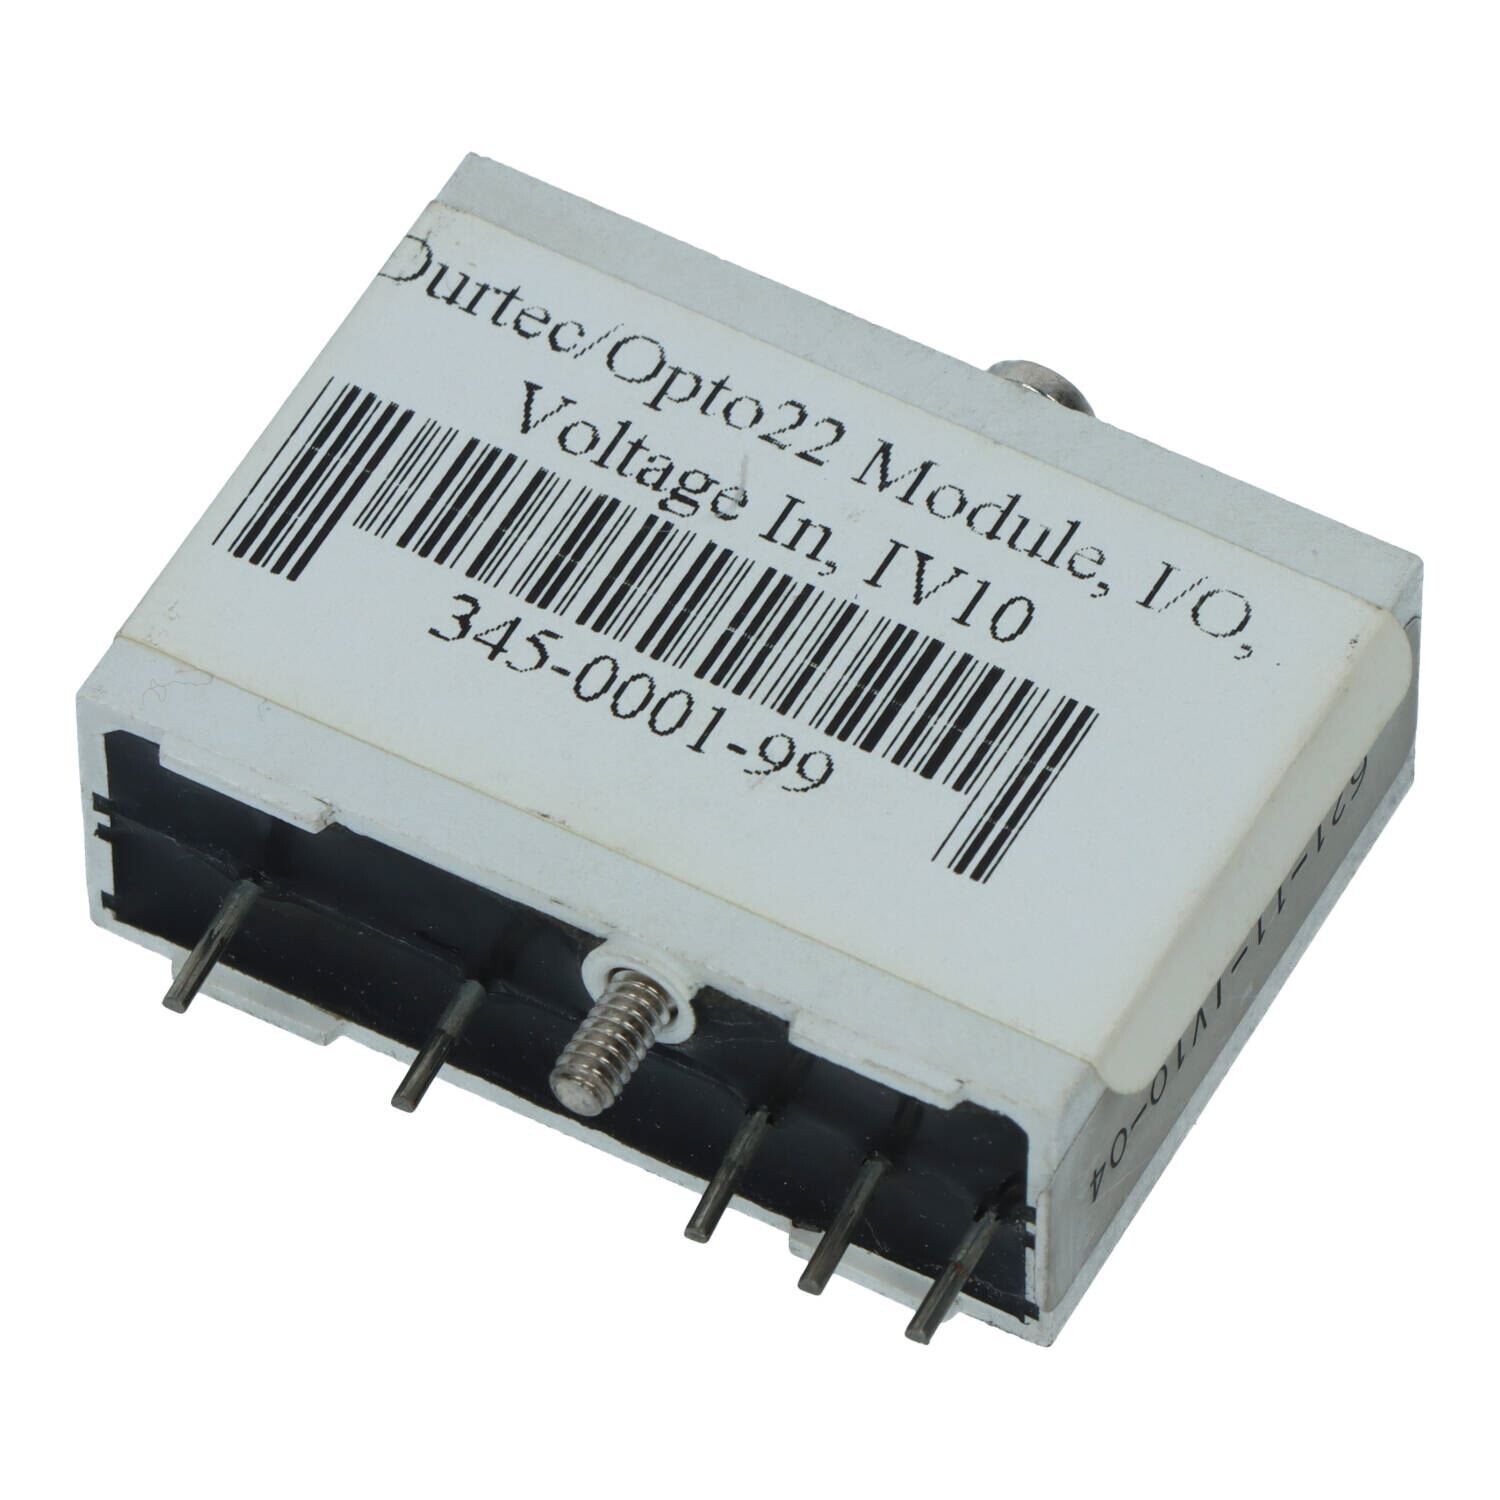 Opto22 Module, I/O, Voltage In, IV10